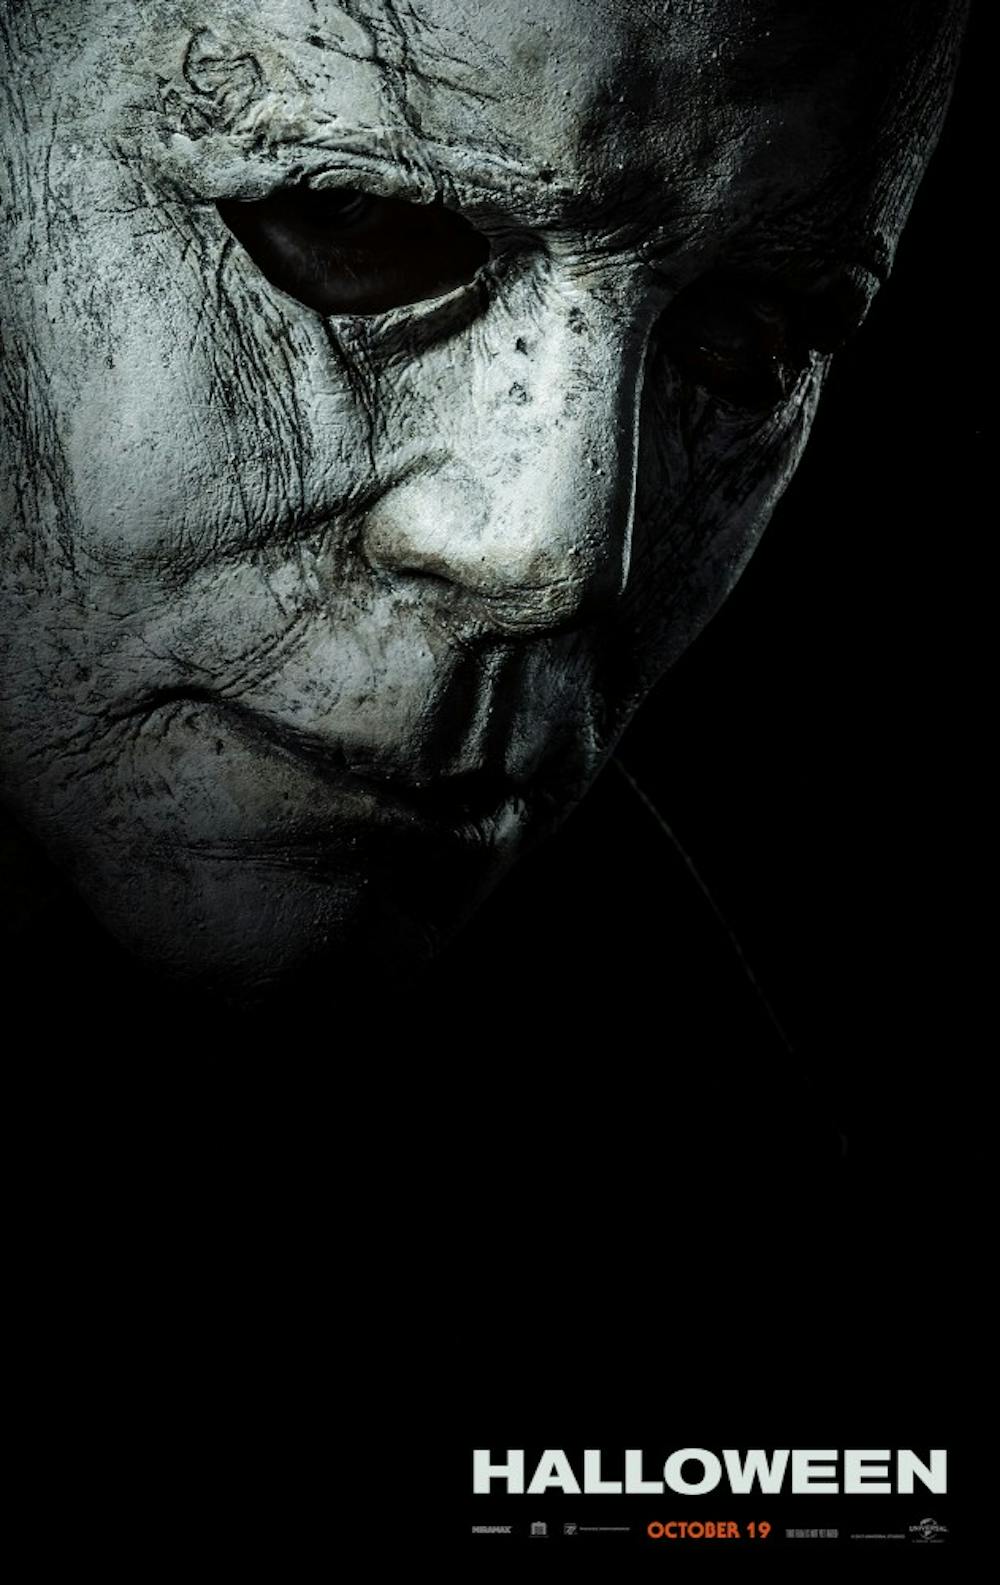 Michael Myers returns to Haddonfield in this serviceable, unsatisfying “Halloween” 